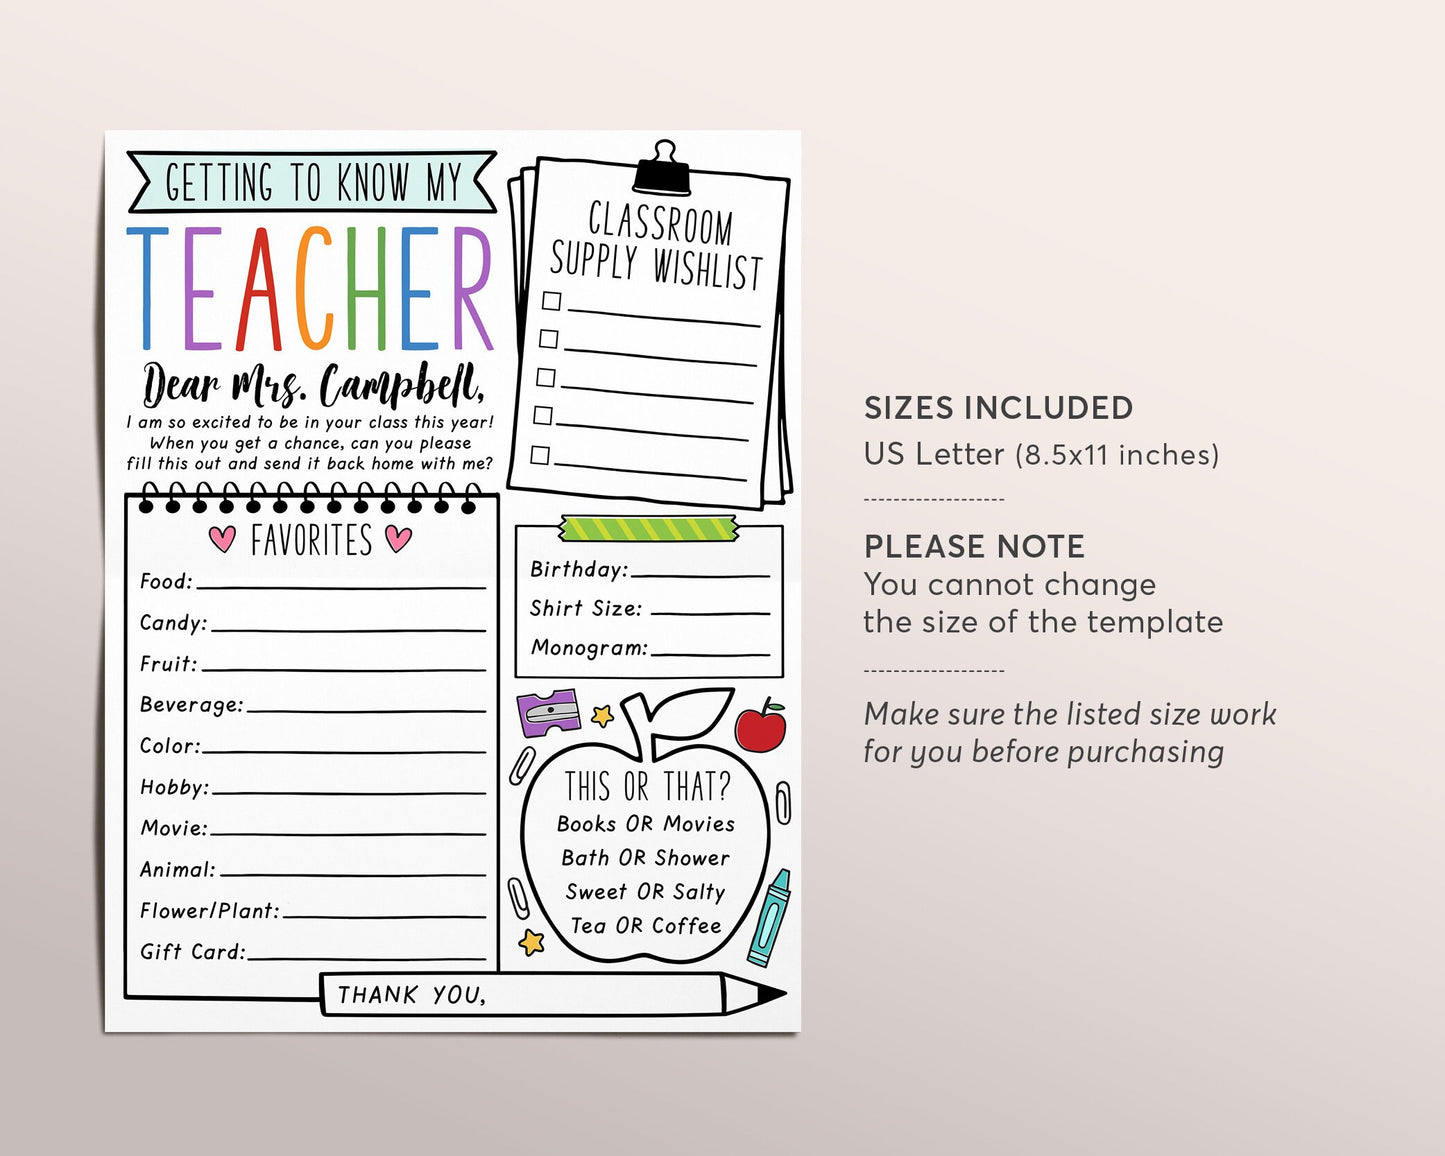 Favorites Teacher Survey Editable Template, Getting To Know My Teacher Questionnaire Worksheet, All About My Teacher, Back To School